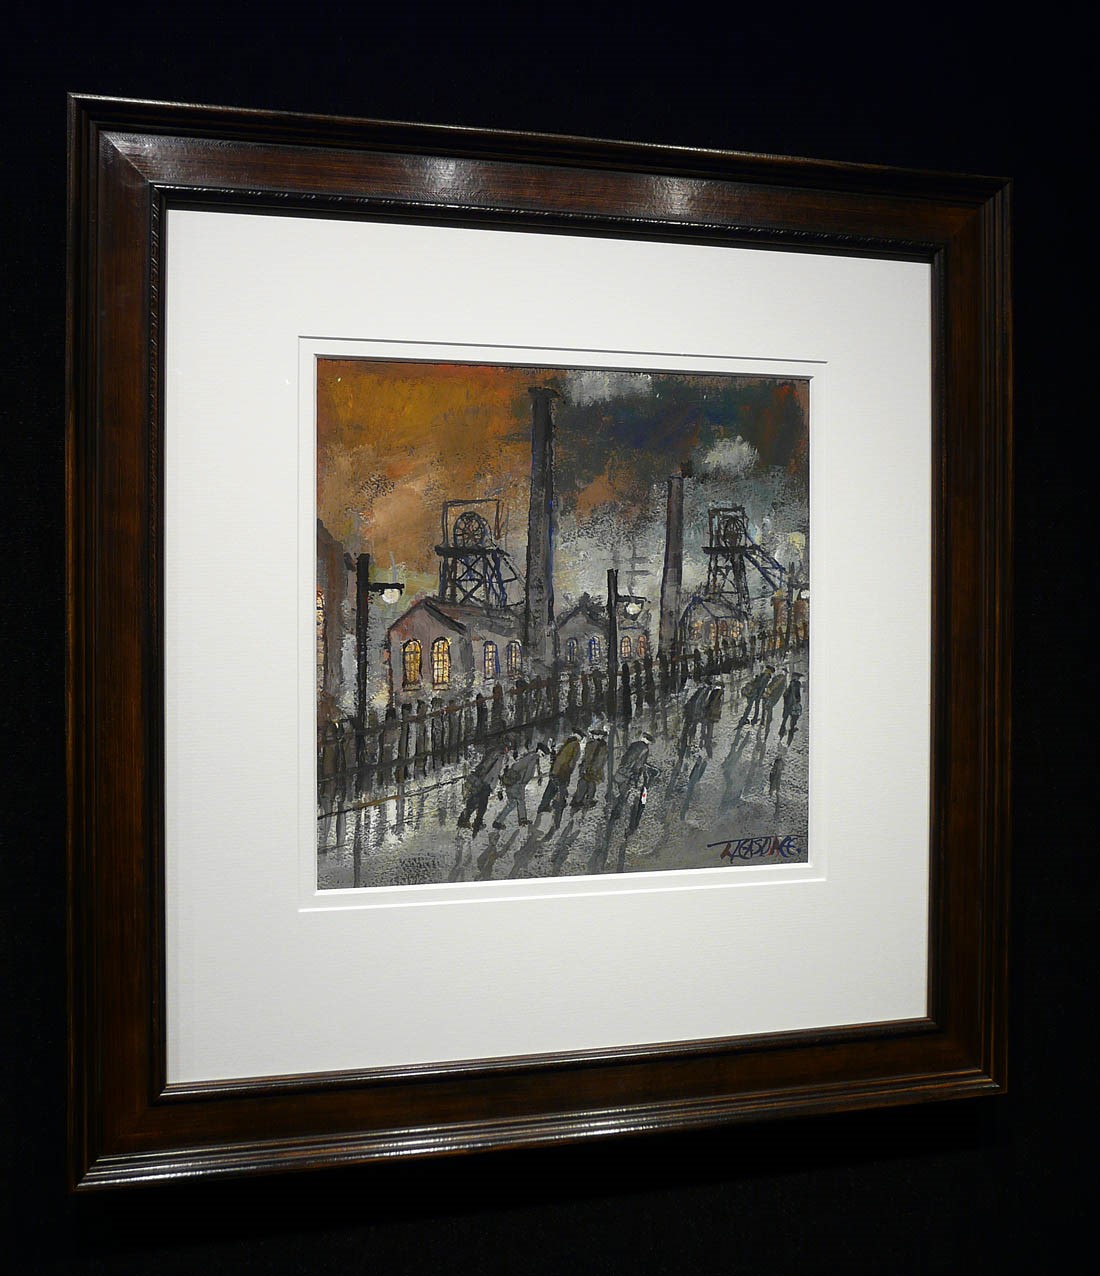 Evening Shadows by Malcolm Teasdale, Mining | Northern | Nostalgic | Bicycle